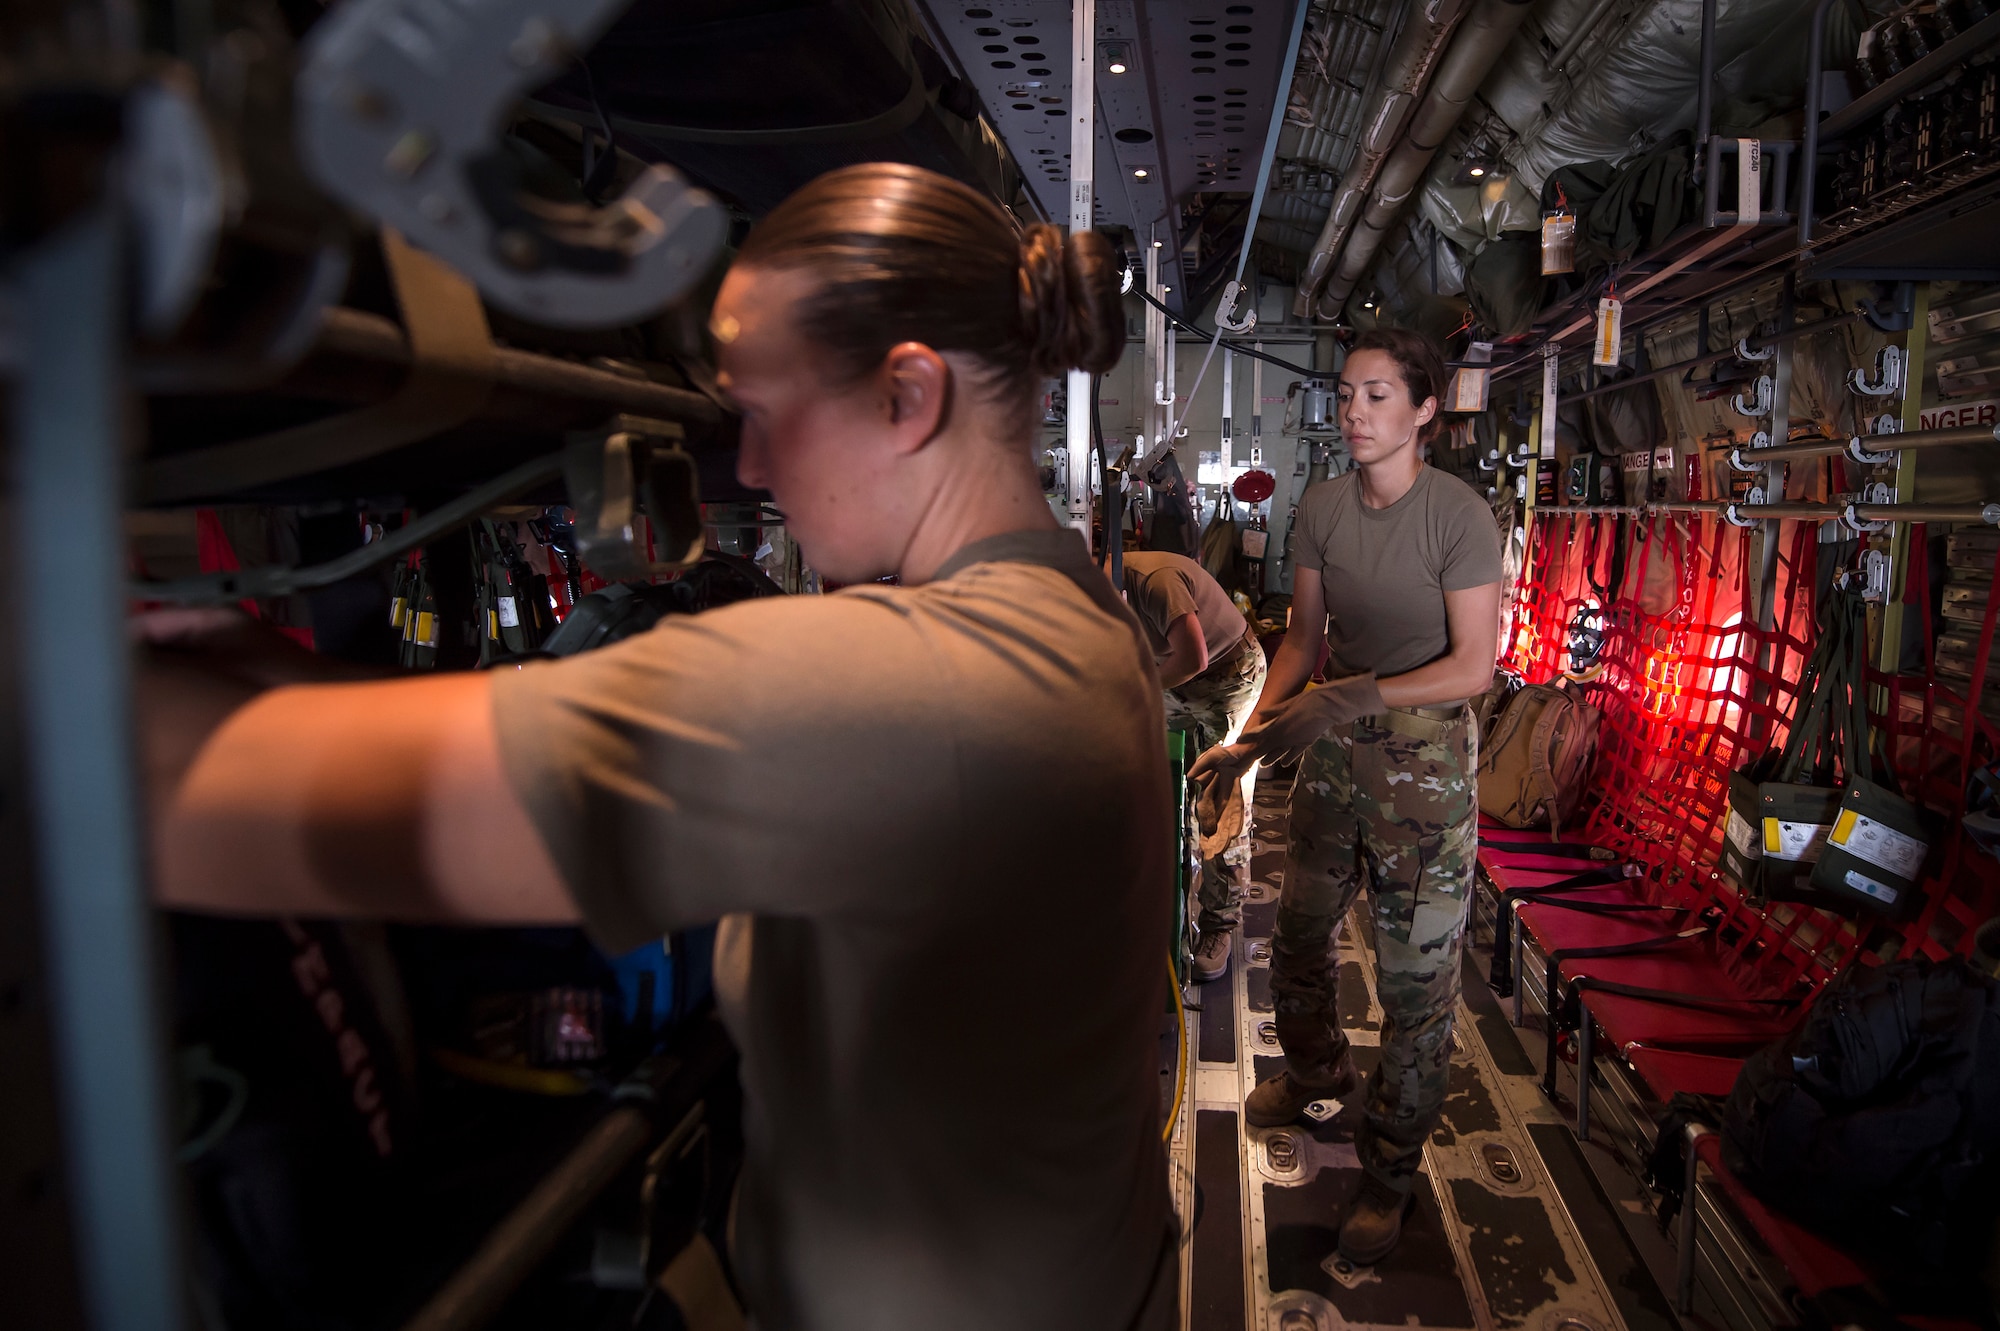 From left, Staff Sgt. Lyndsey Glotfelty, 379th Expeditionary Aeromedical Evacuation Squadron (EAES) aeromedical evacuation technician, and Capt. Aline Putnam, 379th EAES flight nurse, store medical equipment on a C-130 Hercules at Al Udeid Air Base, Qatar, before a recent aeromedical evacuation mission.